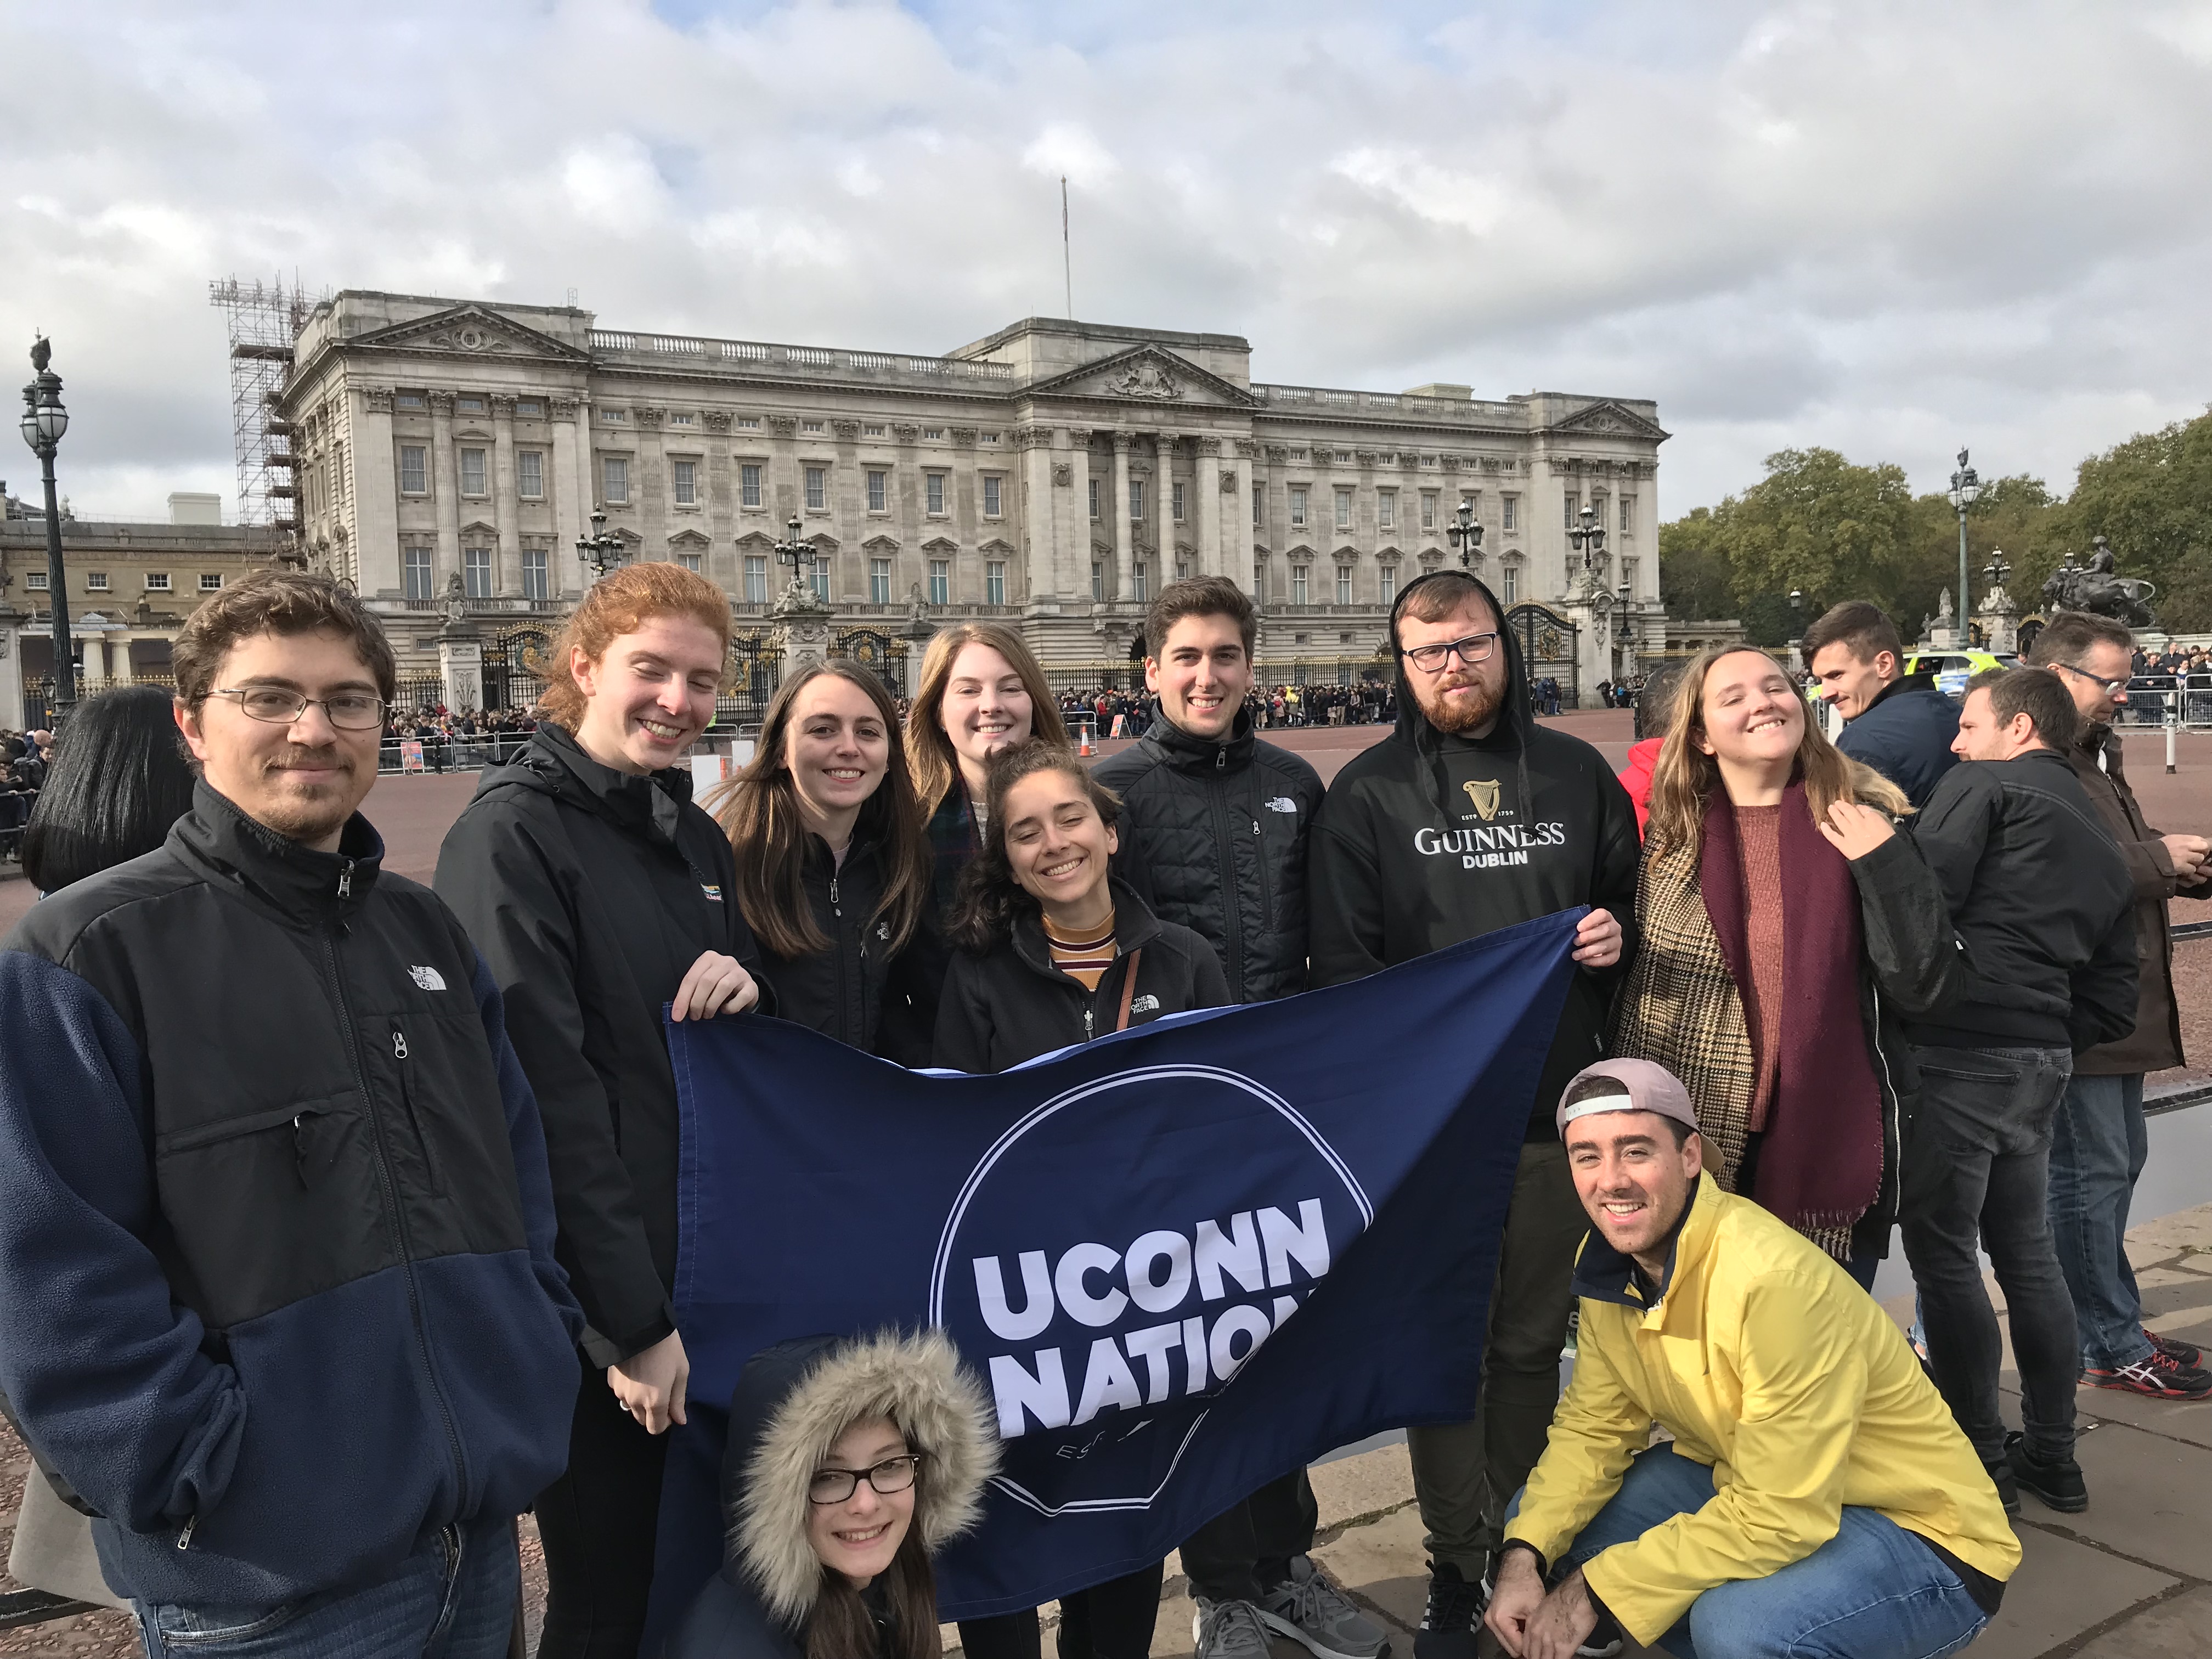 College students gather in front of Buckingham Palace in London.